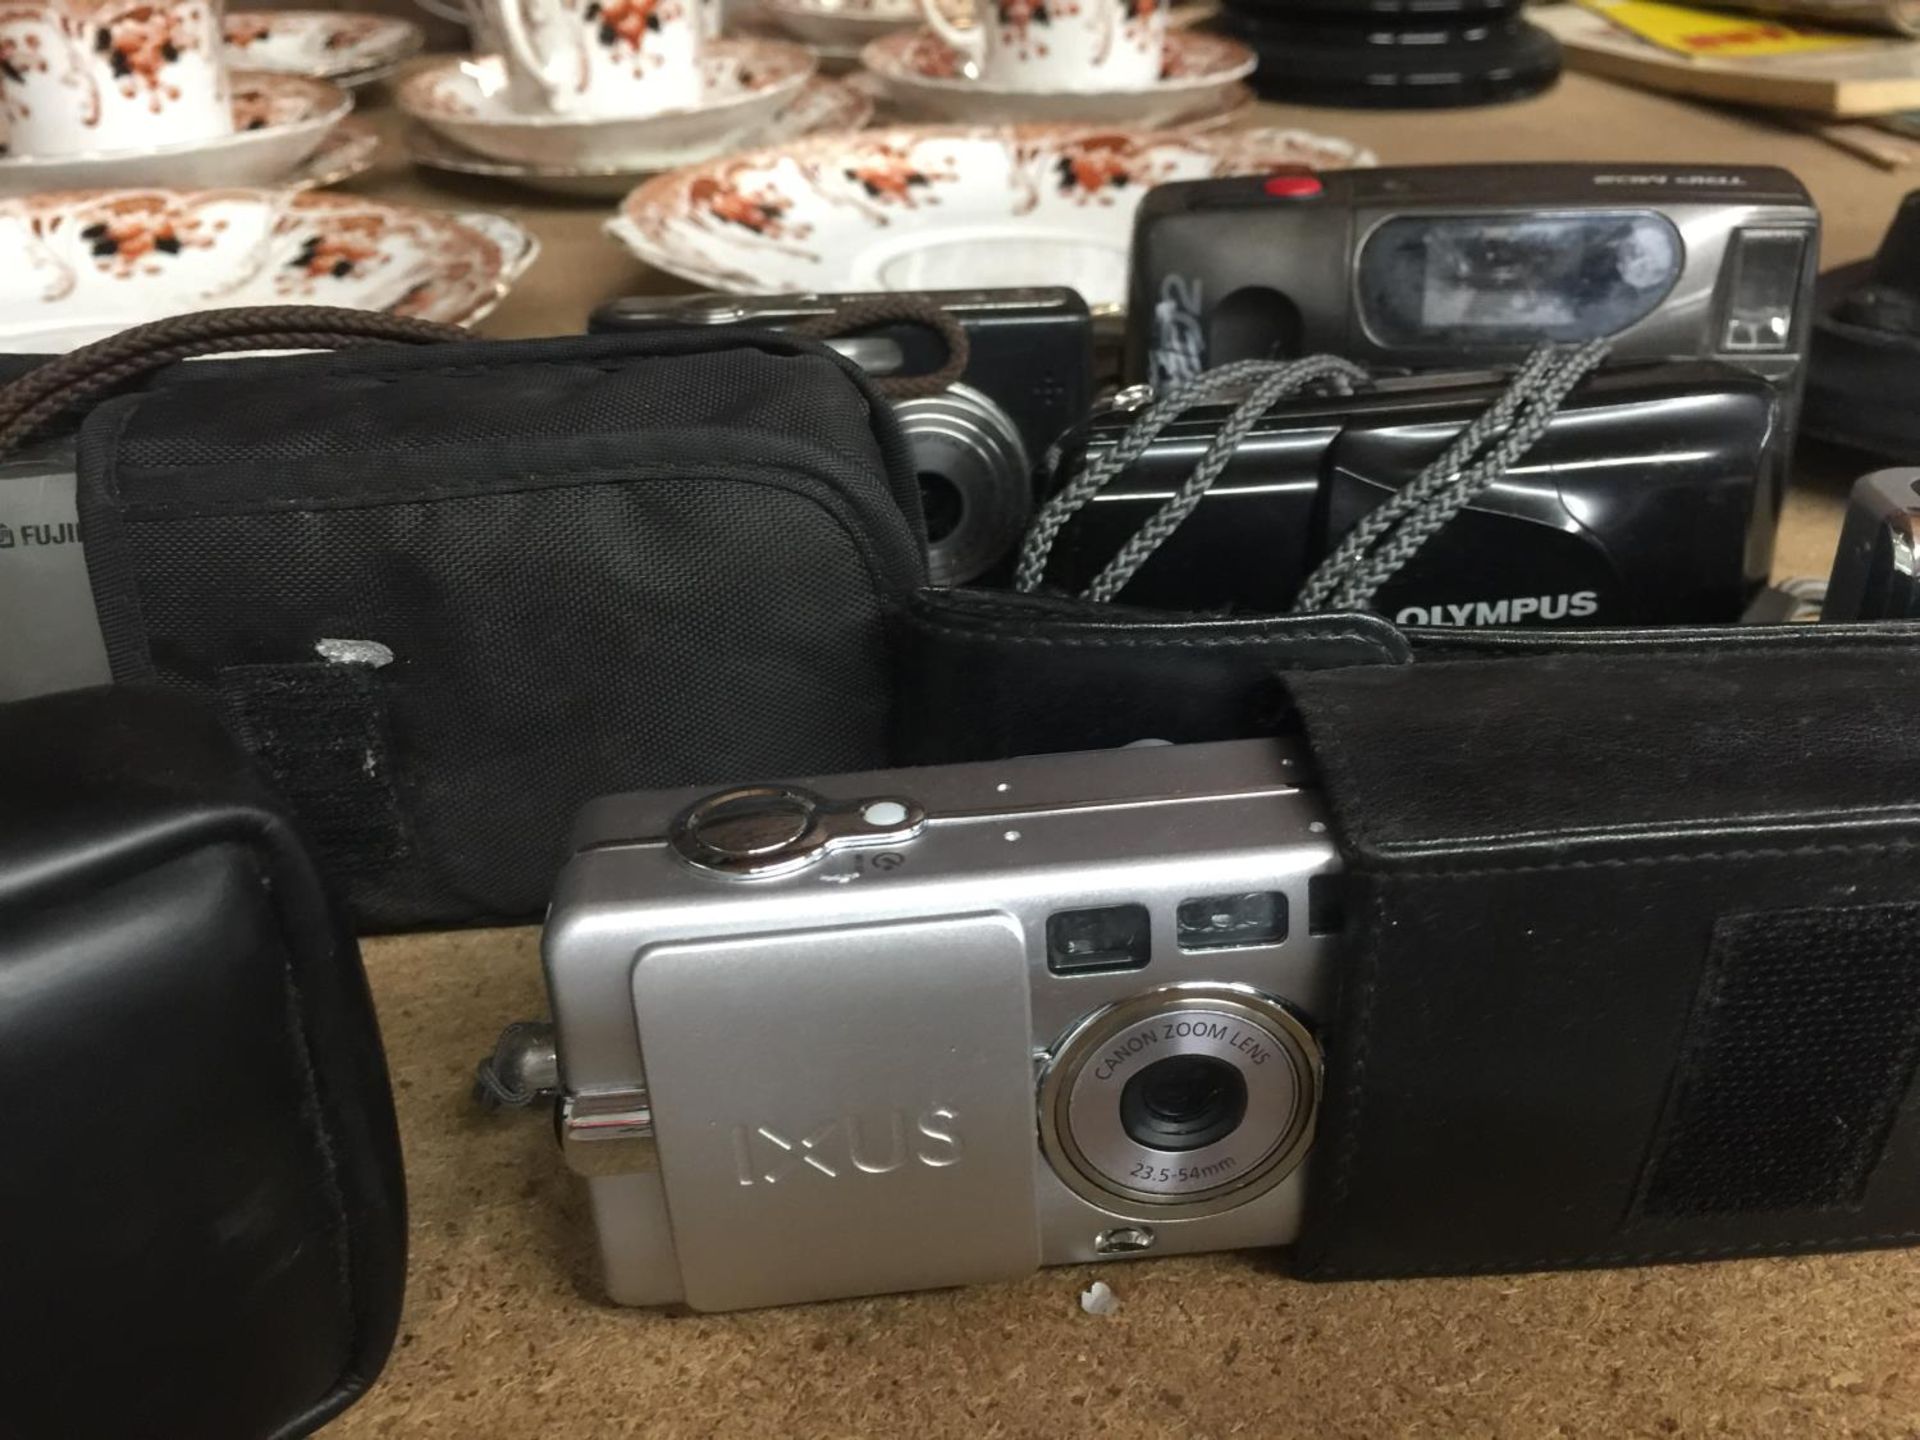 A QUANTITY OF VINTAGE CAMERAS TO INCLUDE A CANON EXUS III, FUJIFILM FINEPIX, OLYMPUS ZOOM 80, ETC - Image 6 of 7